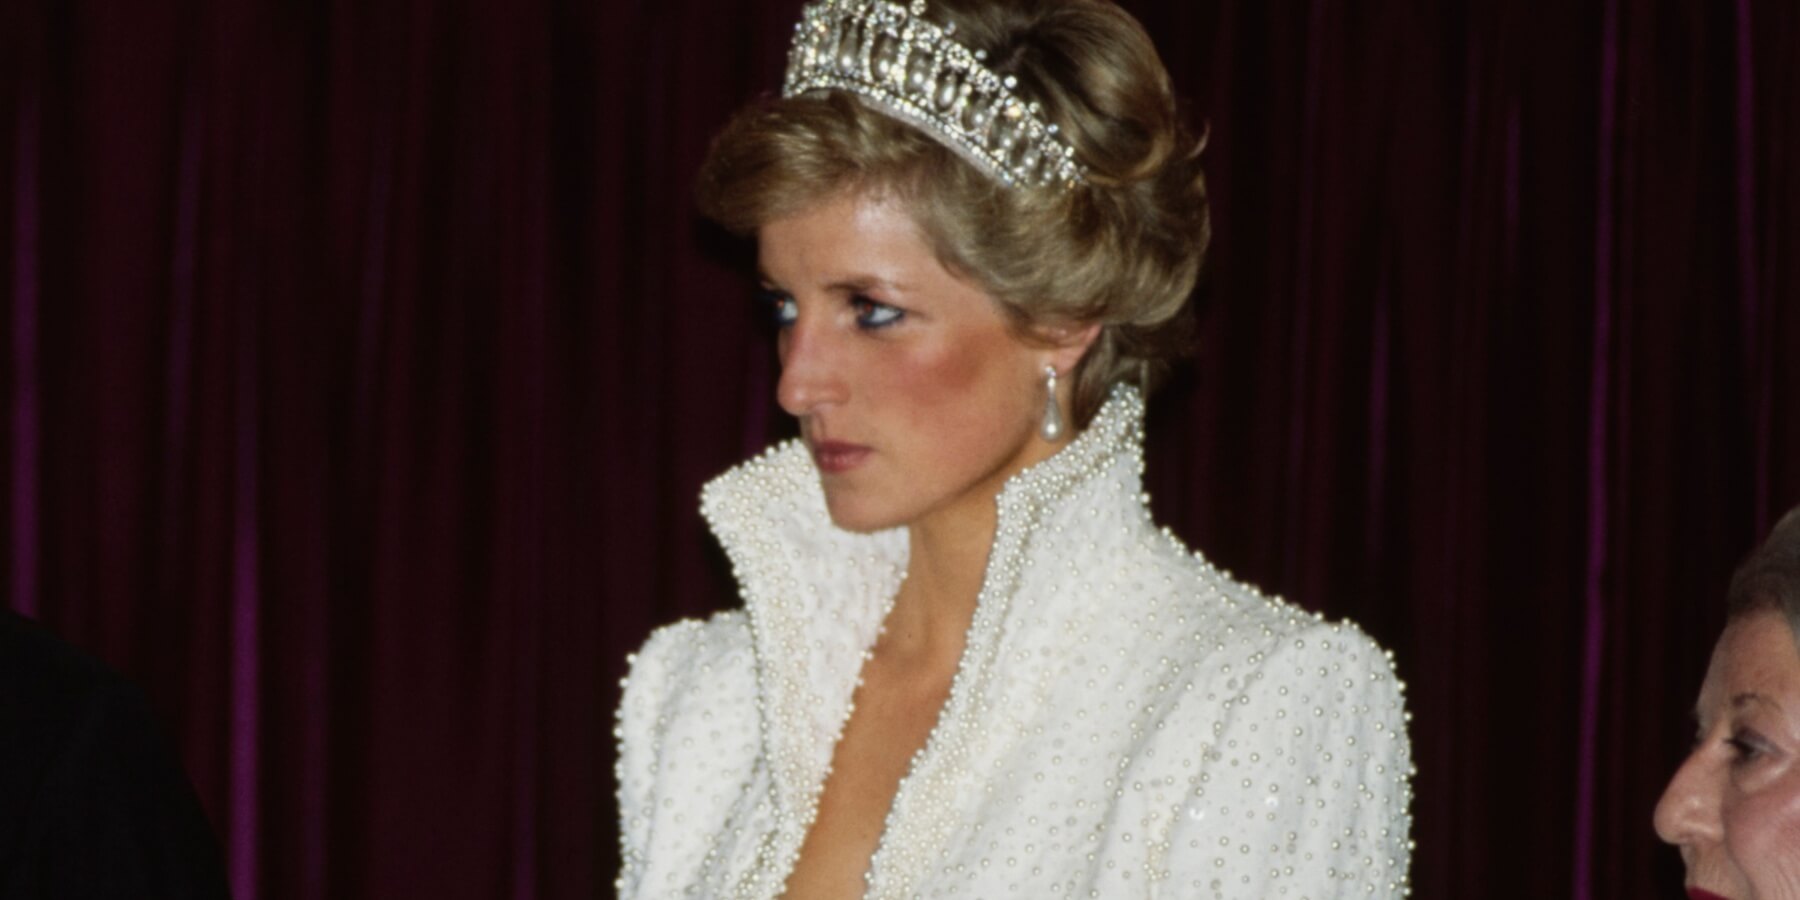 Princess Diana wears the Lovers Knot tiara in 1989.